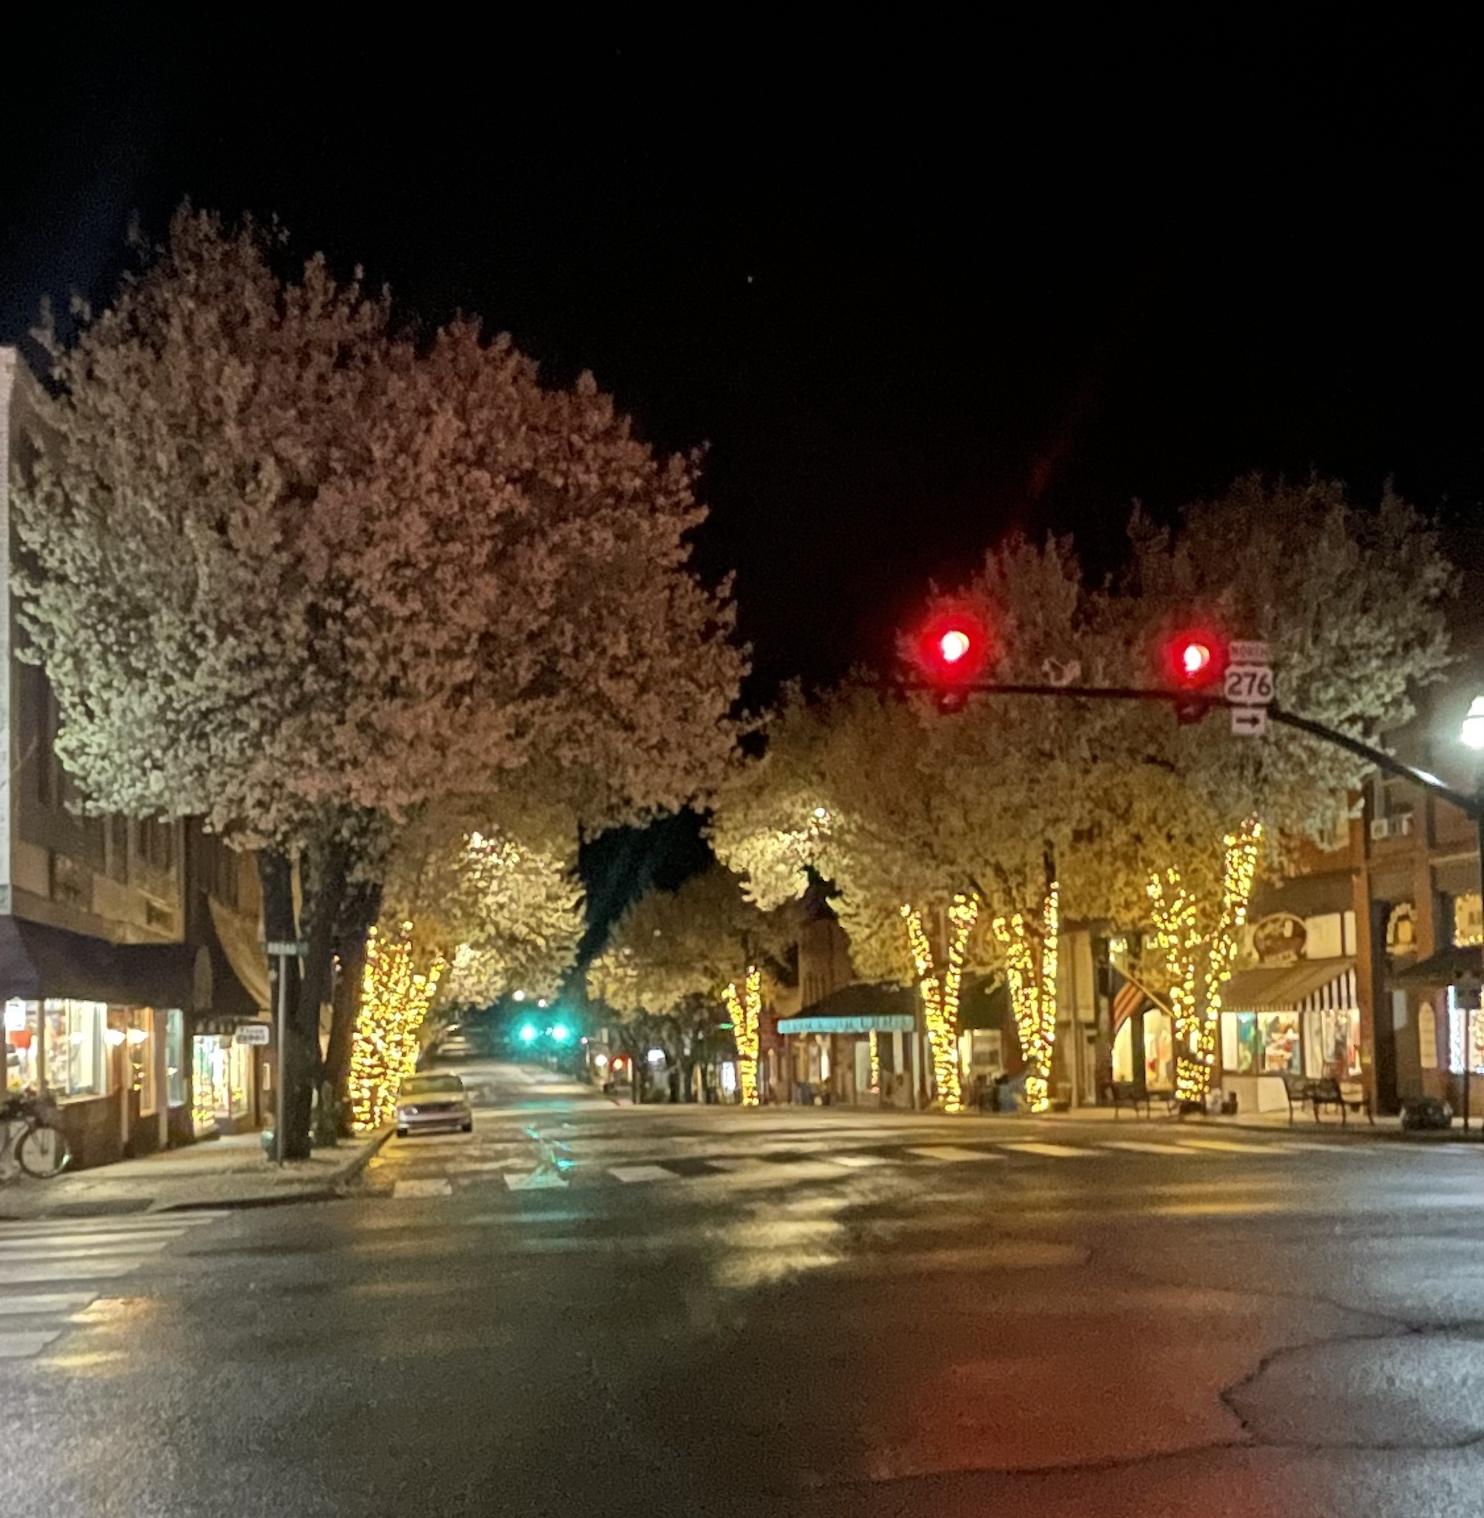 A city street at night with trees decorated with christmas lights